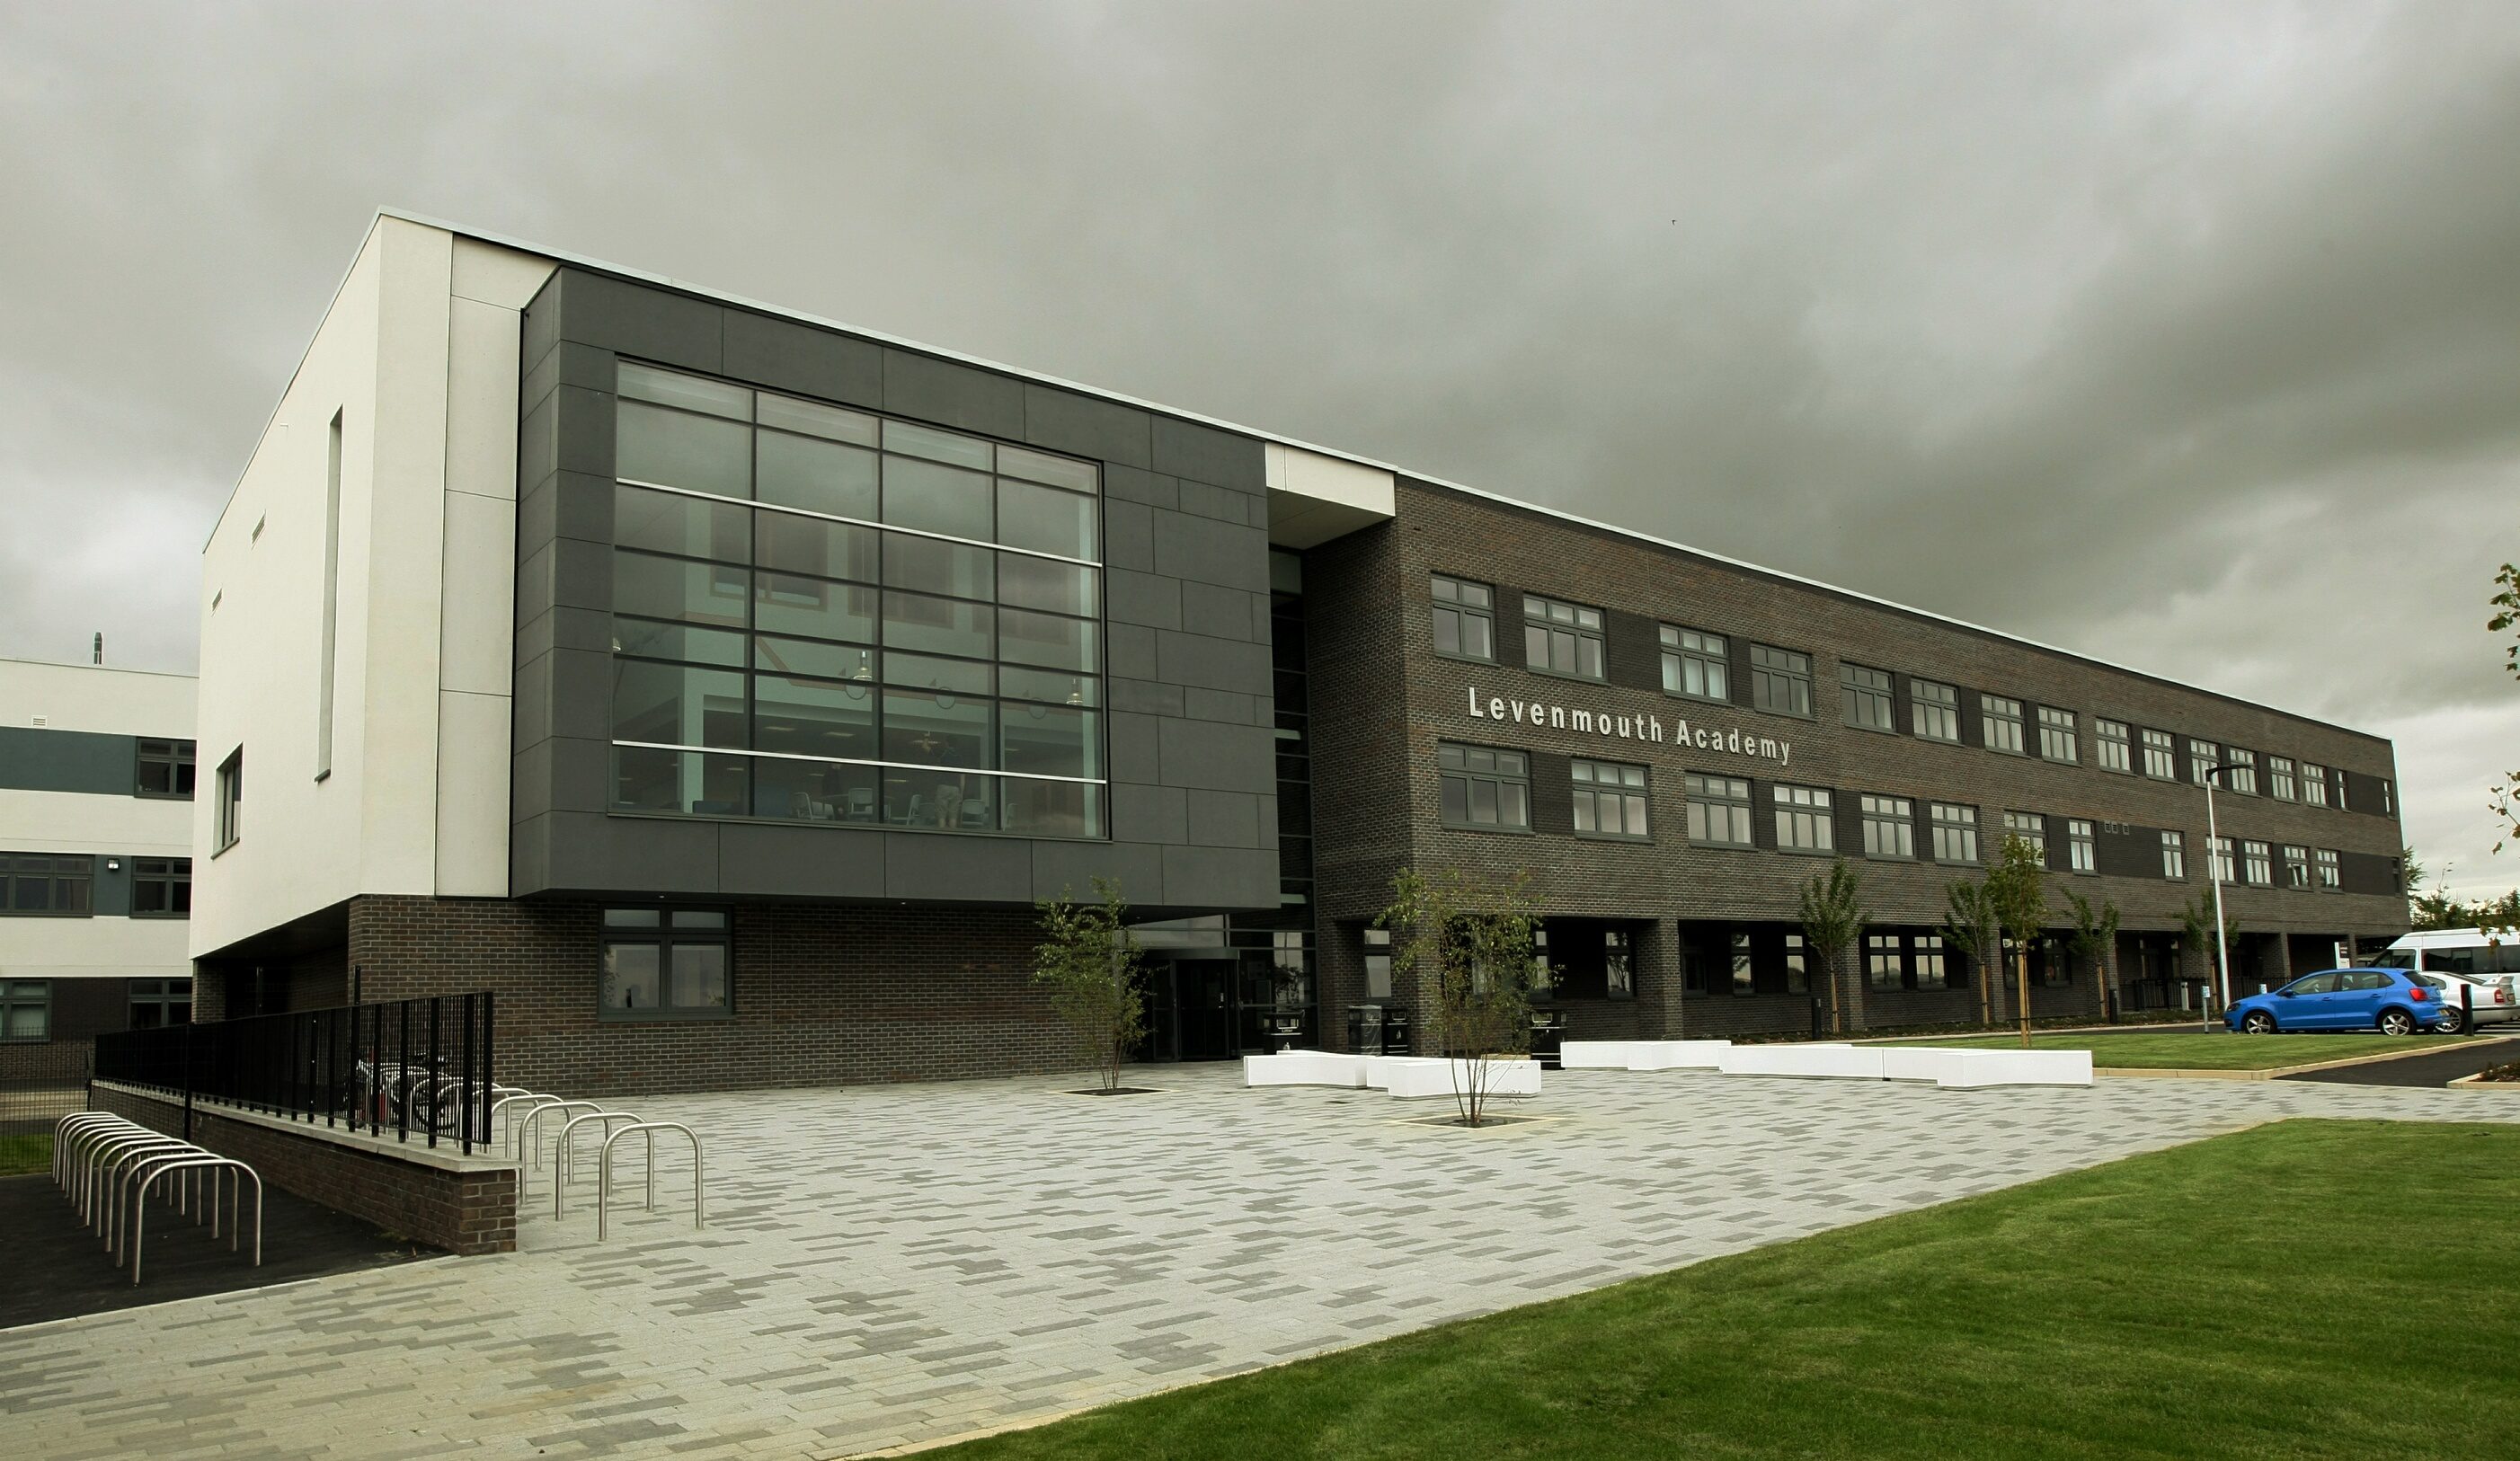 Pupils will return to schools across Courier country, including Levenmouth Academy, from August 12.